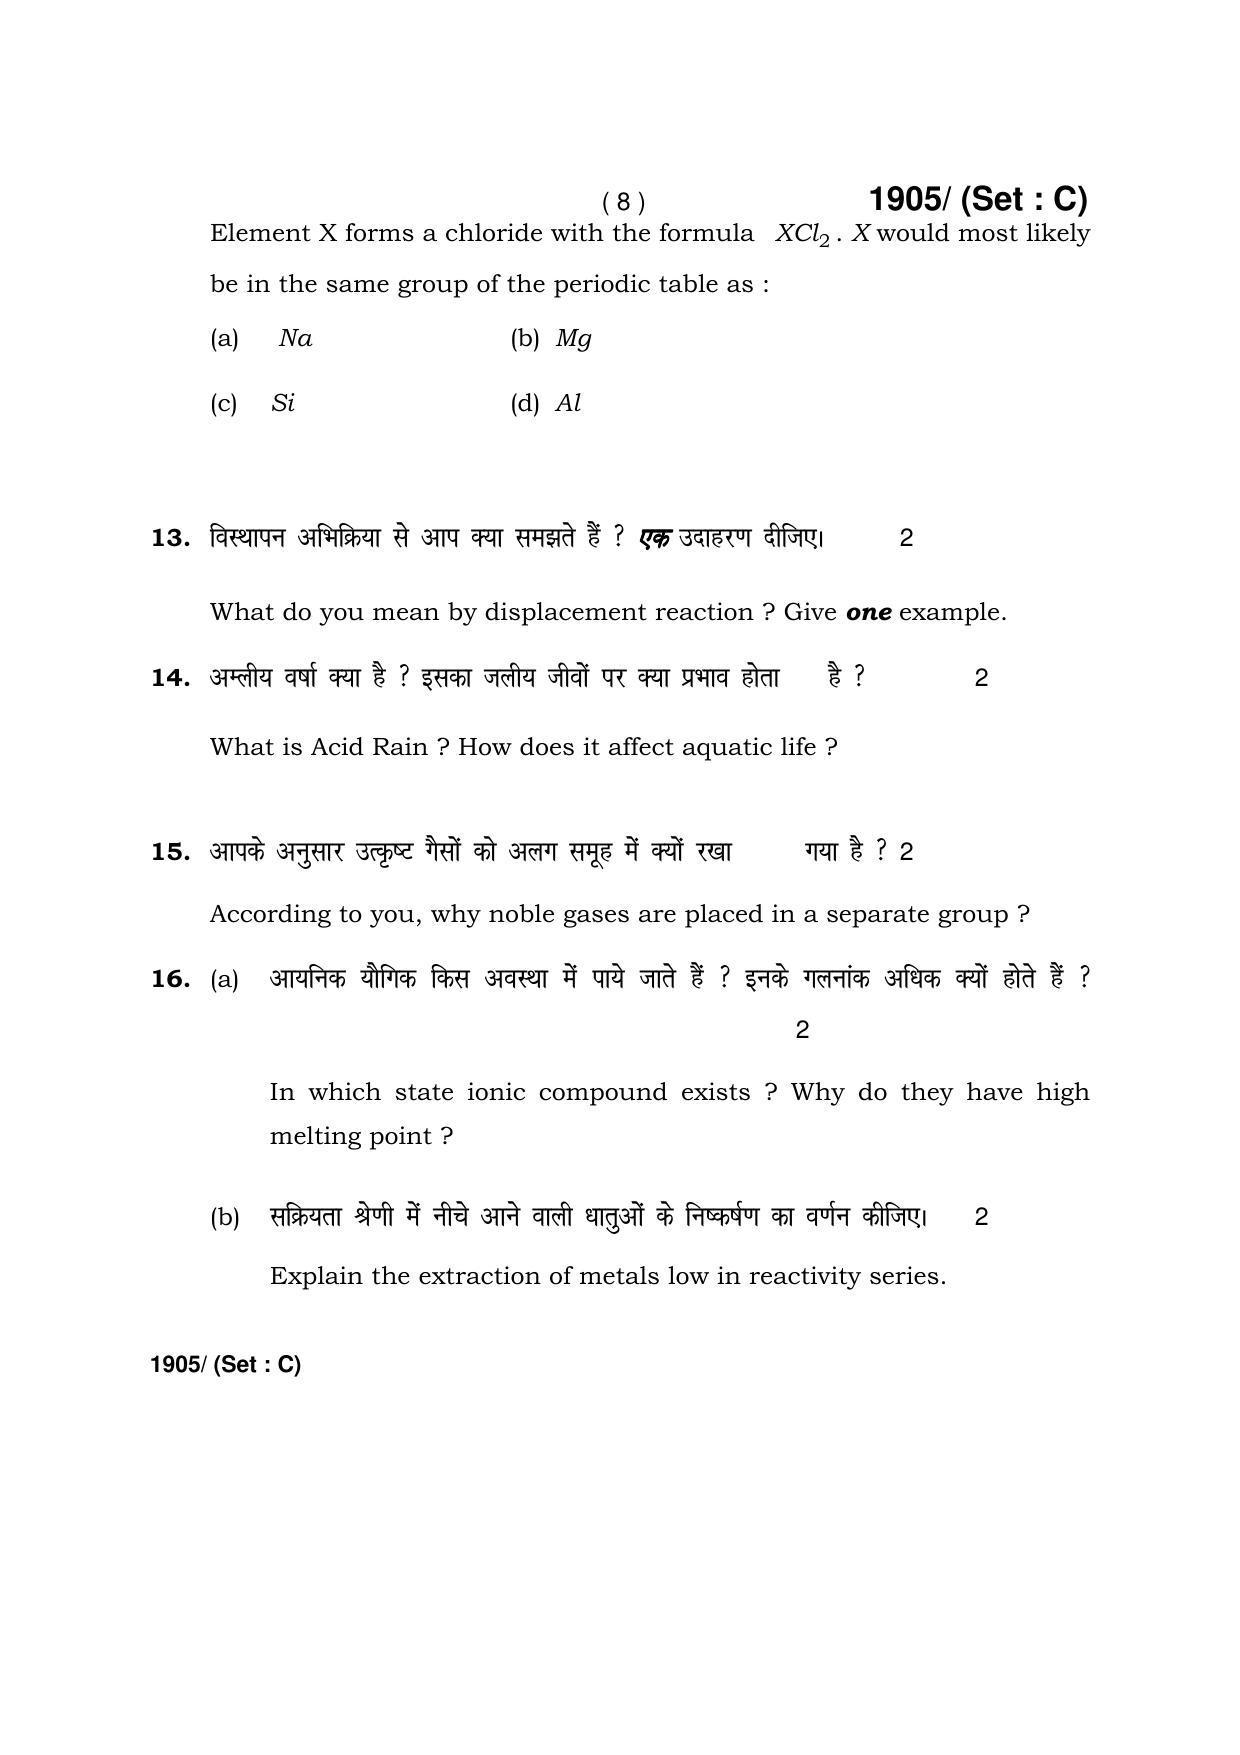 Haryana Board HBSE Class 10 Science -C 2017 Question Paper - Page 8